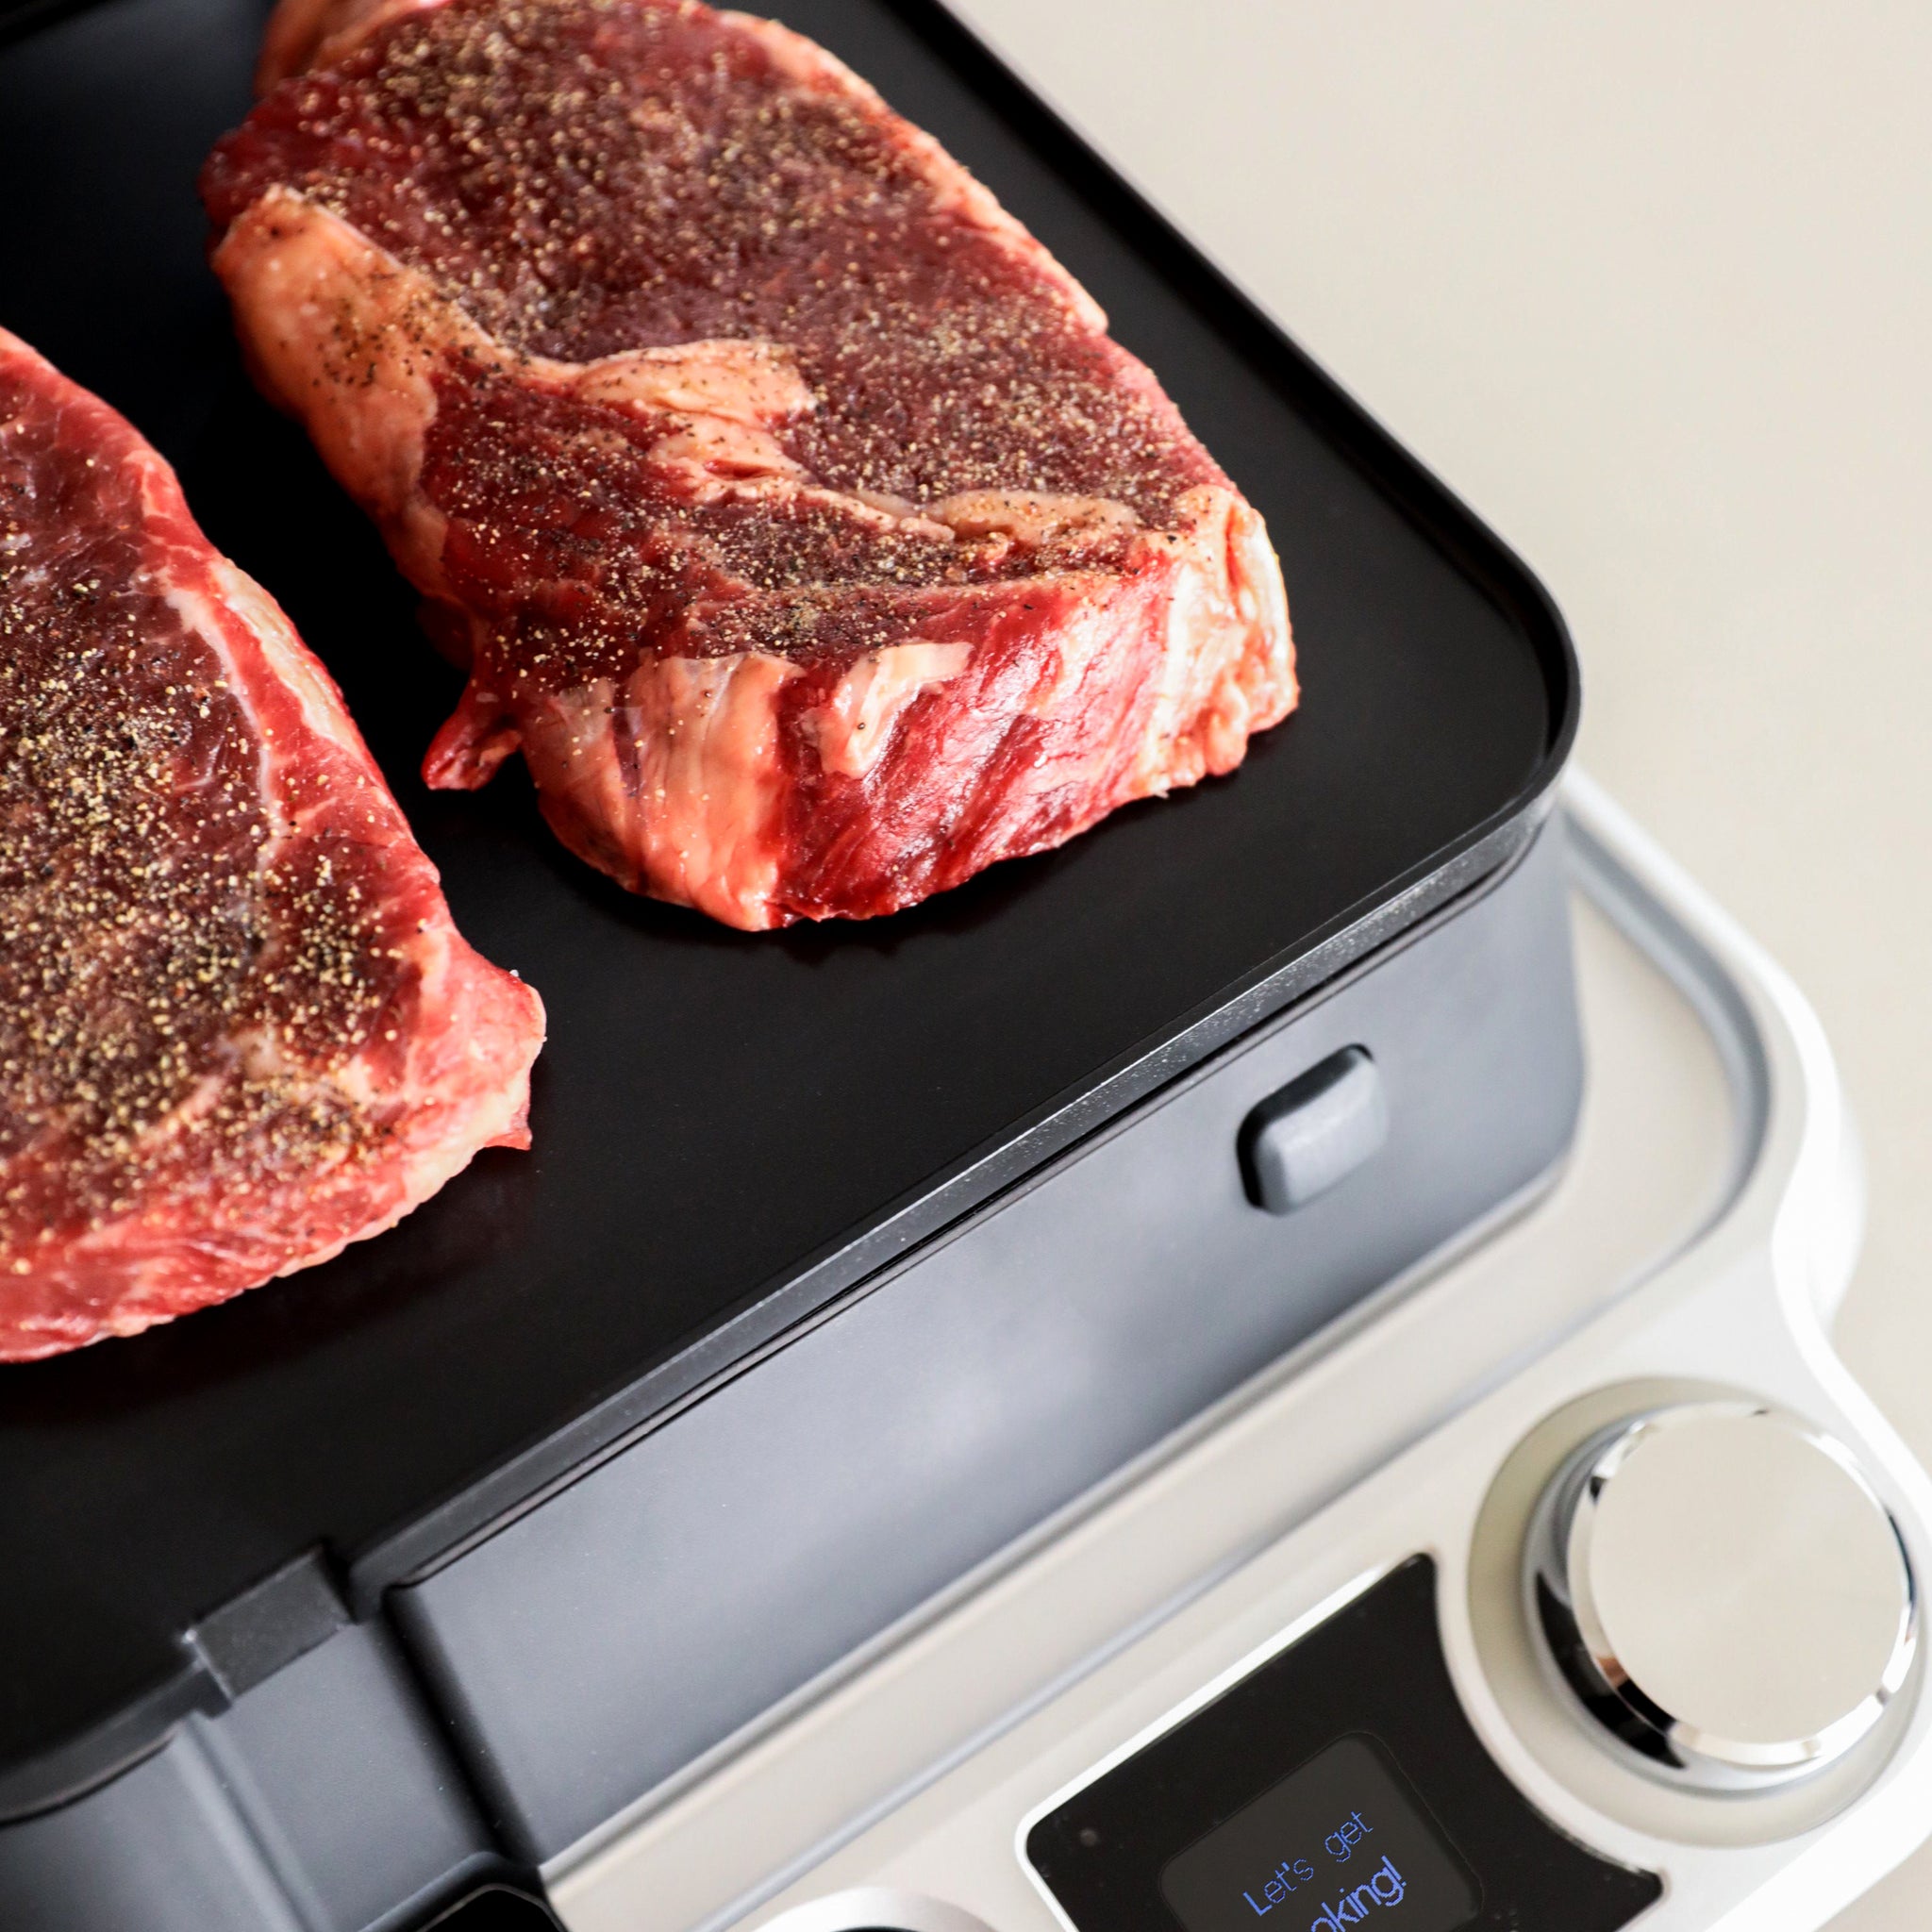 Cinder grill cook the perfect steak every time